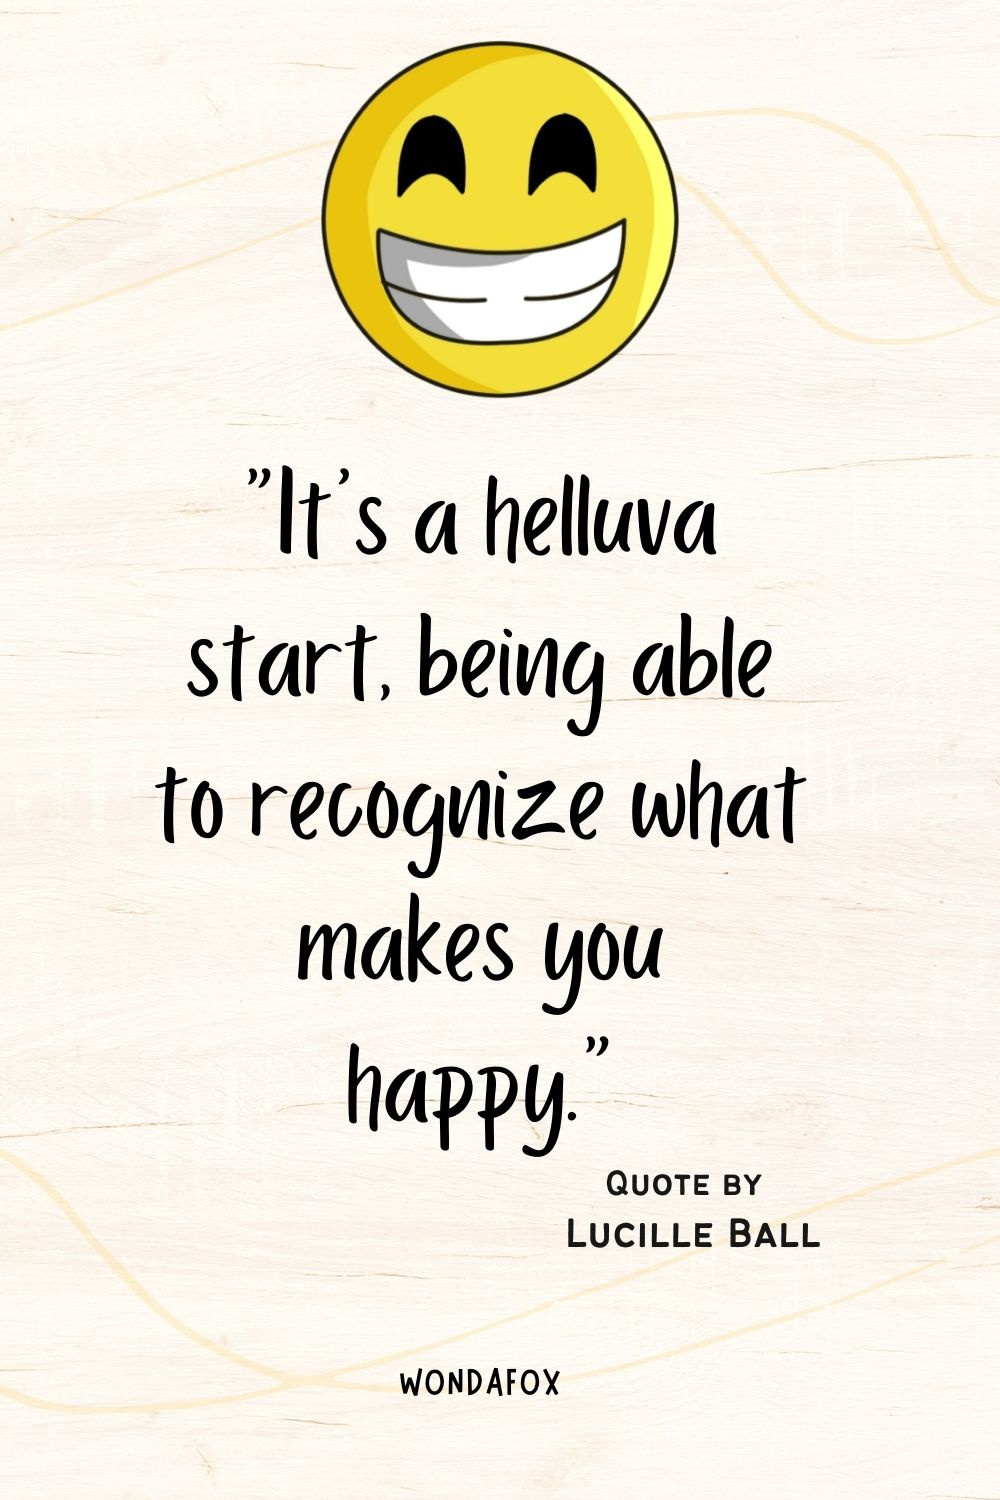 “It’s a helluva start, being able to recognize what makes you happy.”
Lucille Ball